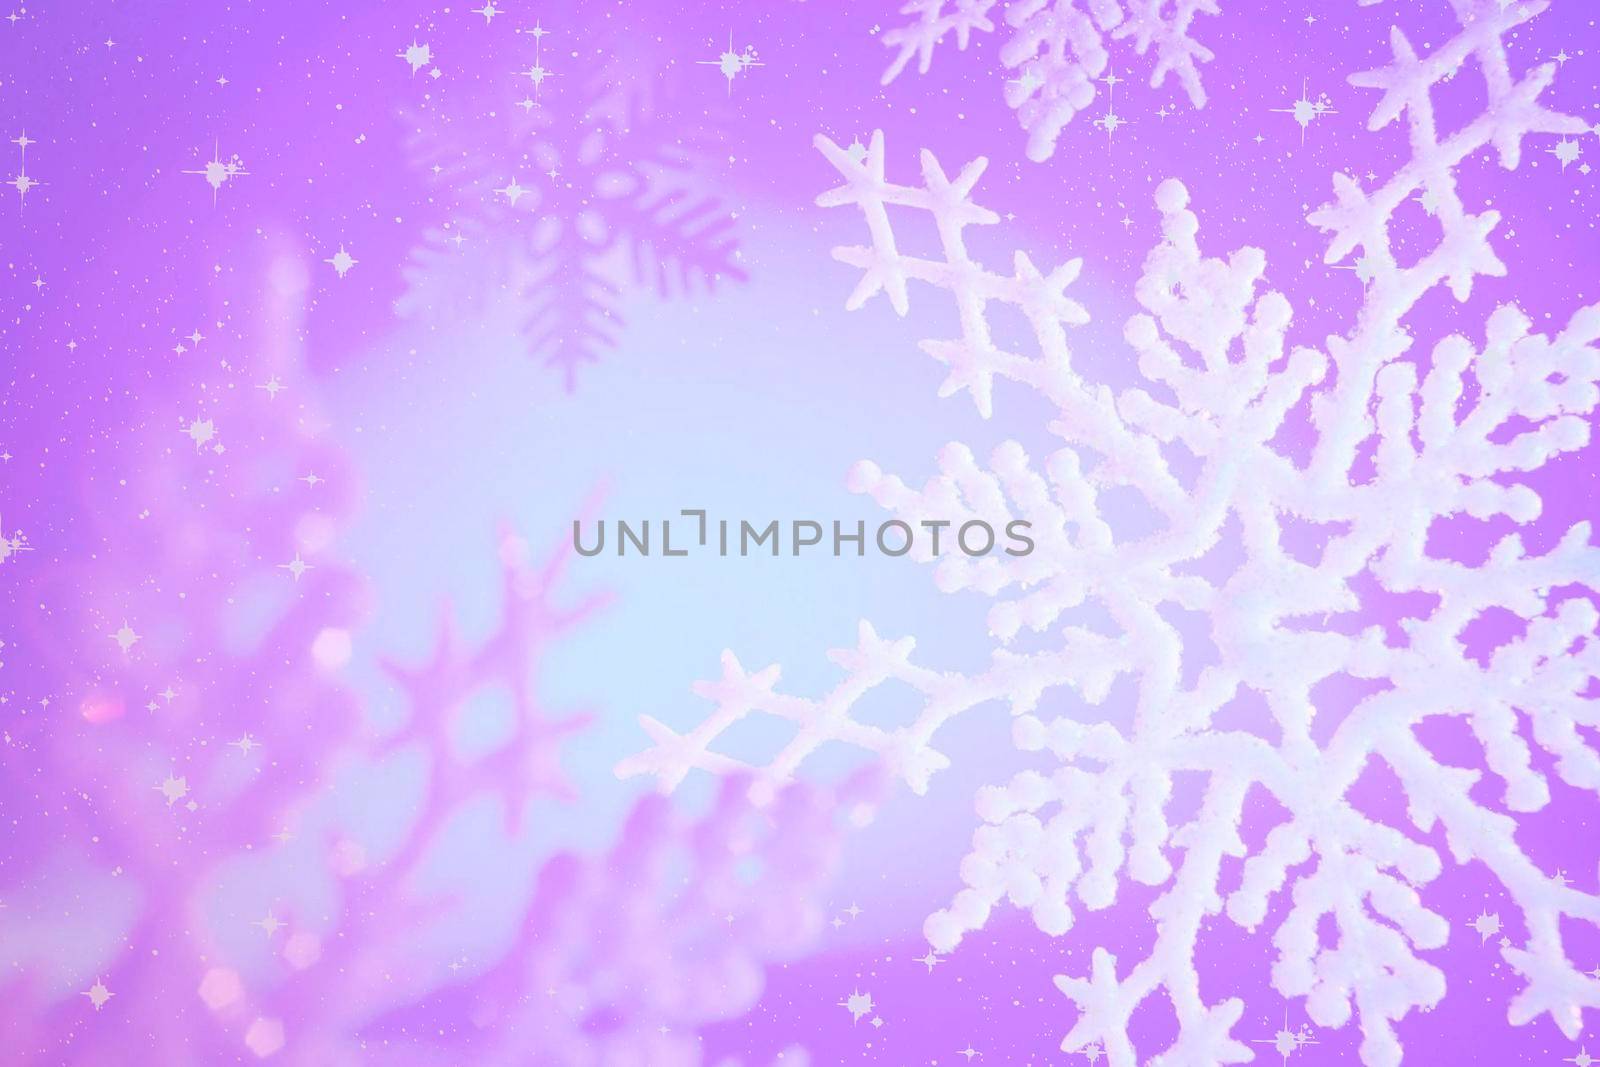 Beautiful festive background with snowflakes for Christmas and New year greetings.